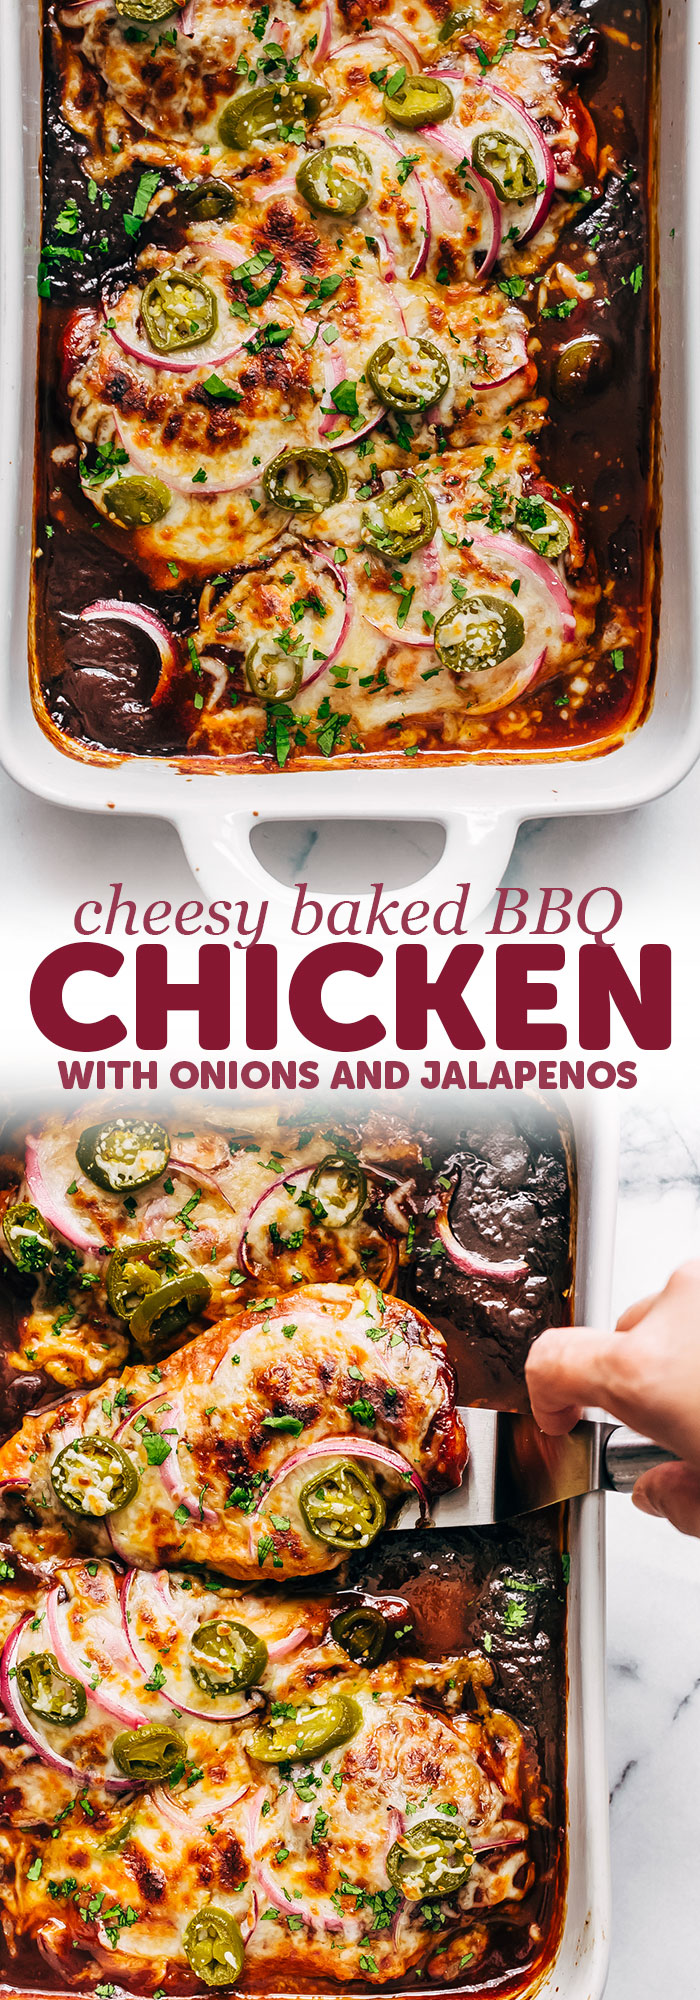 Easy Cheesy Baked BBQ Chicken - just 7 simple ingredients to my baked chicken. It's made inn pot dish and comes together in roughly 30 minutes! #bakedchicken #easychickendinner #chickendinners #chickenrecipes #bbqchicken #bakedbbqchicken | Littlespicejar.com